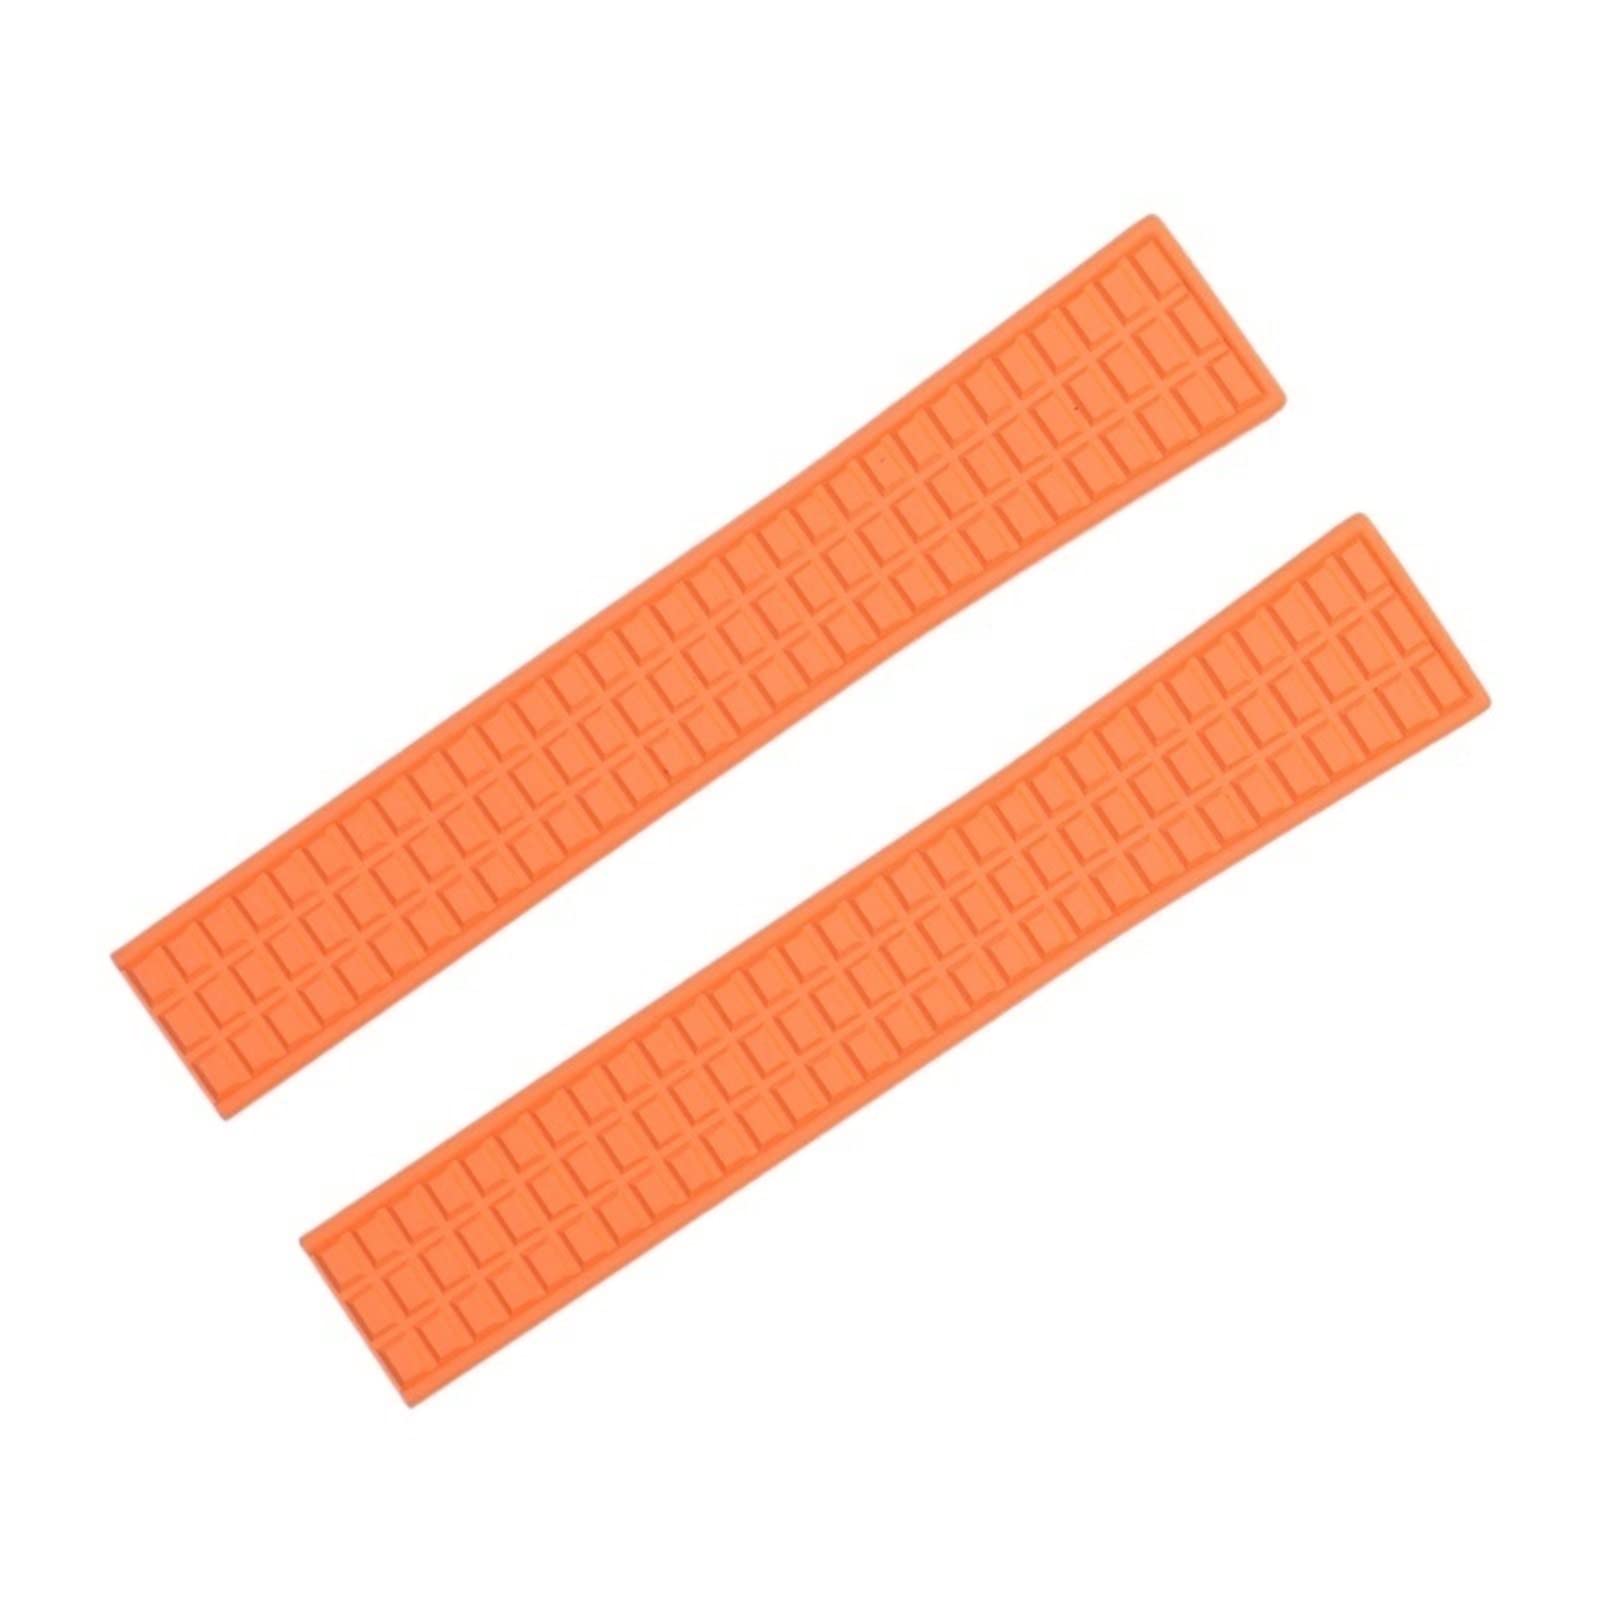 JWTPRO Waterproof FKM Fluororubber Rubber Watch Band 18mm 19mm Accessories Replace for Patek Strap for Philippe for Aquanaut 5067A-001 Belt (Color : Orange, Size : 19mm-Without Buckle)